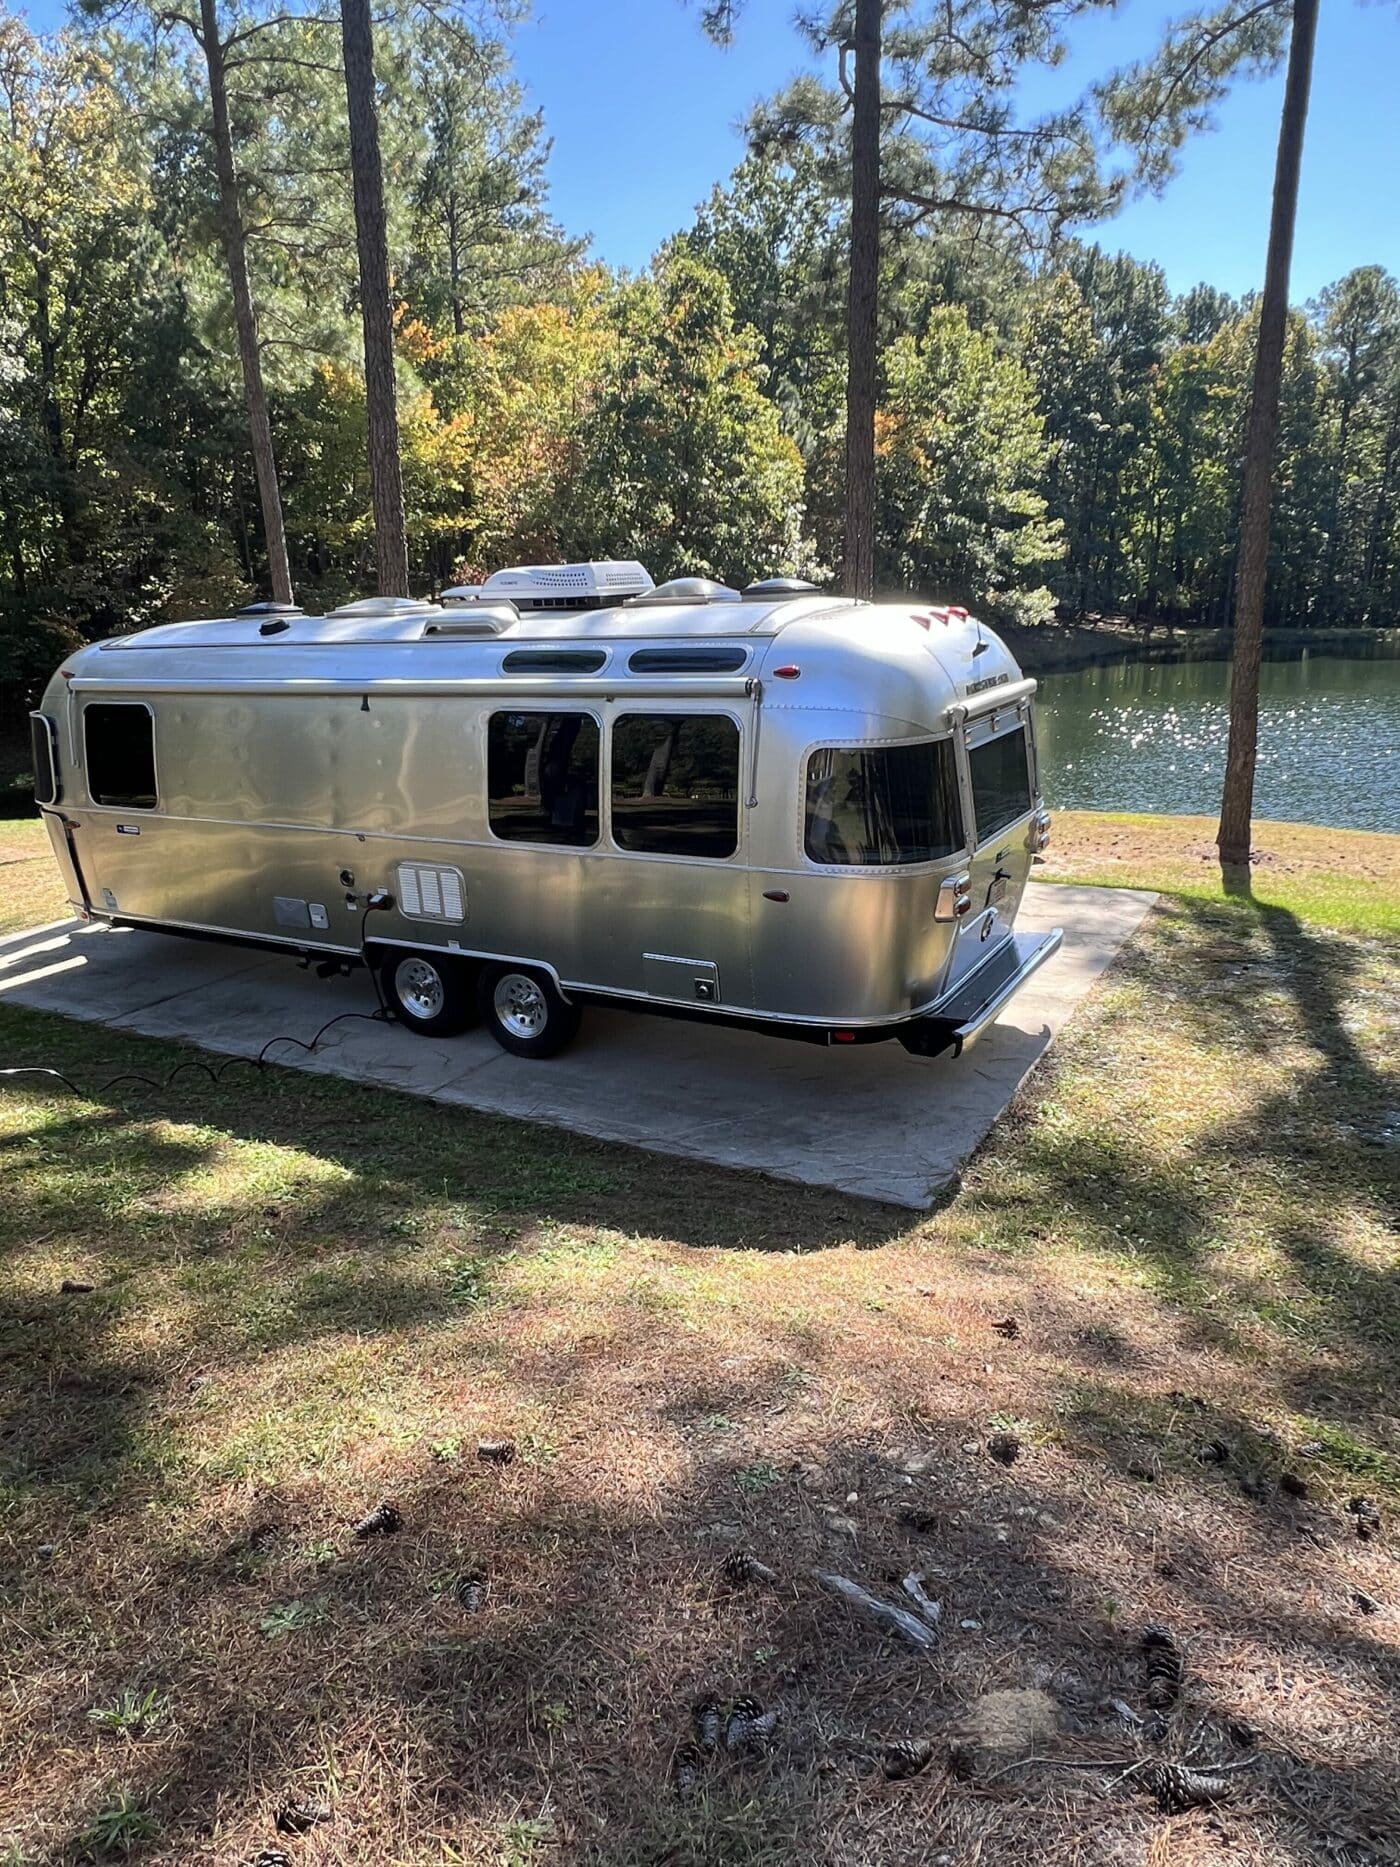 2017 28FT Tommy Bahama For Sale In Pittsboro, North Carolina ...